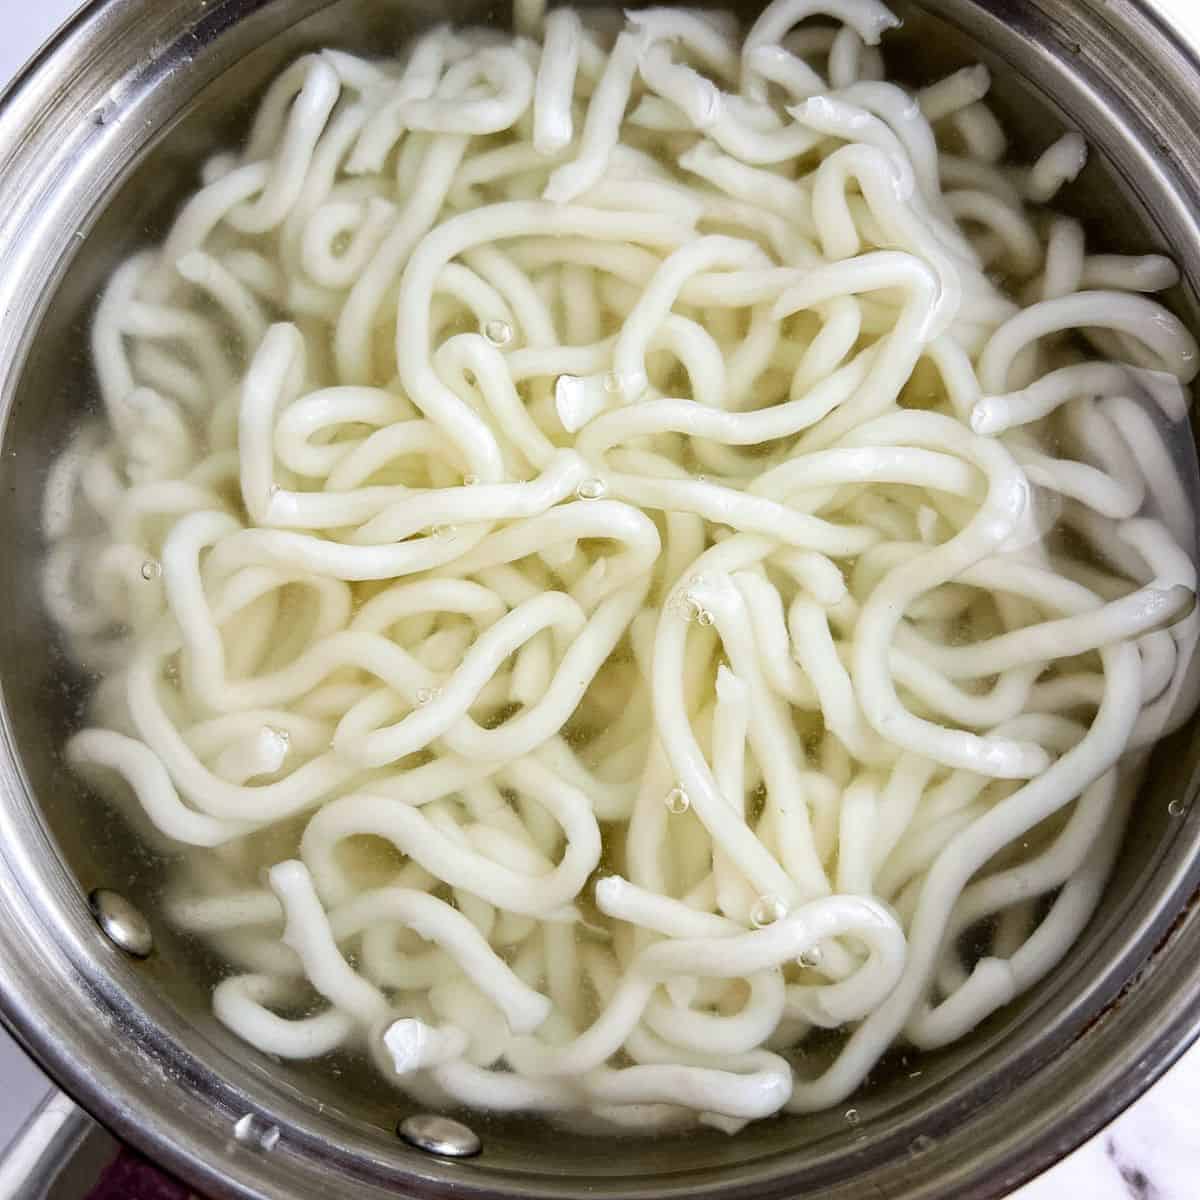 Cooking udon noodles in boiling water.